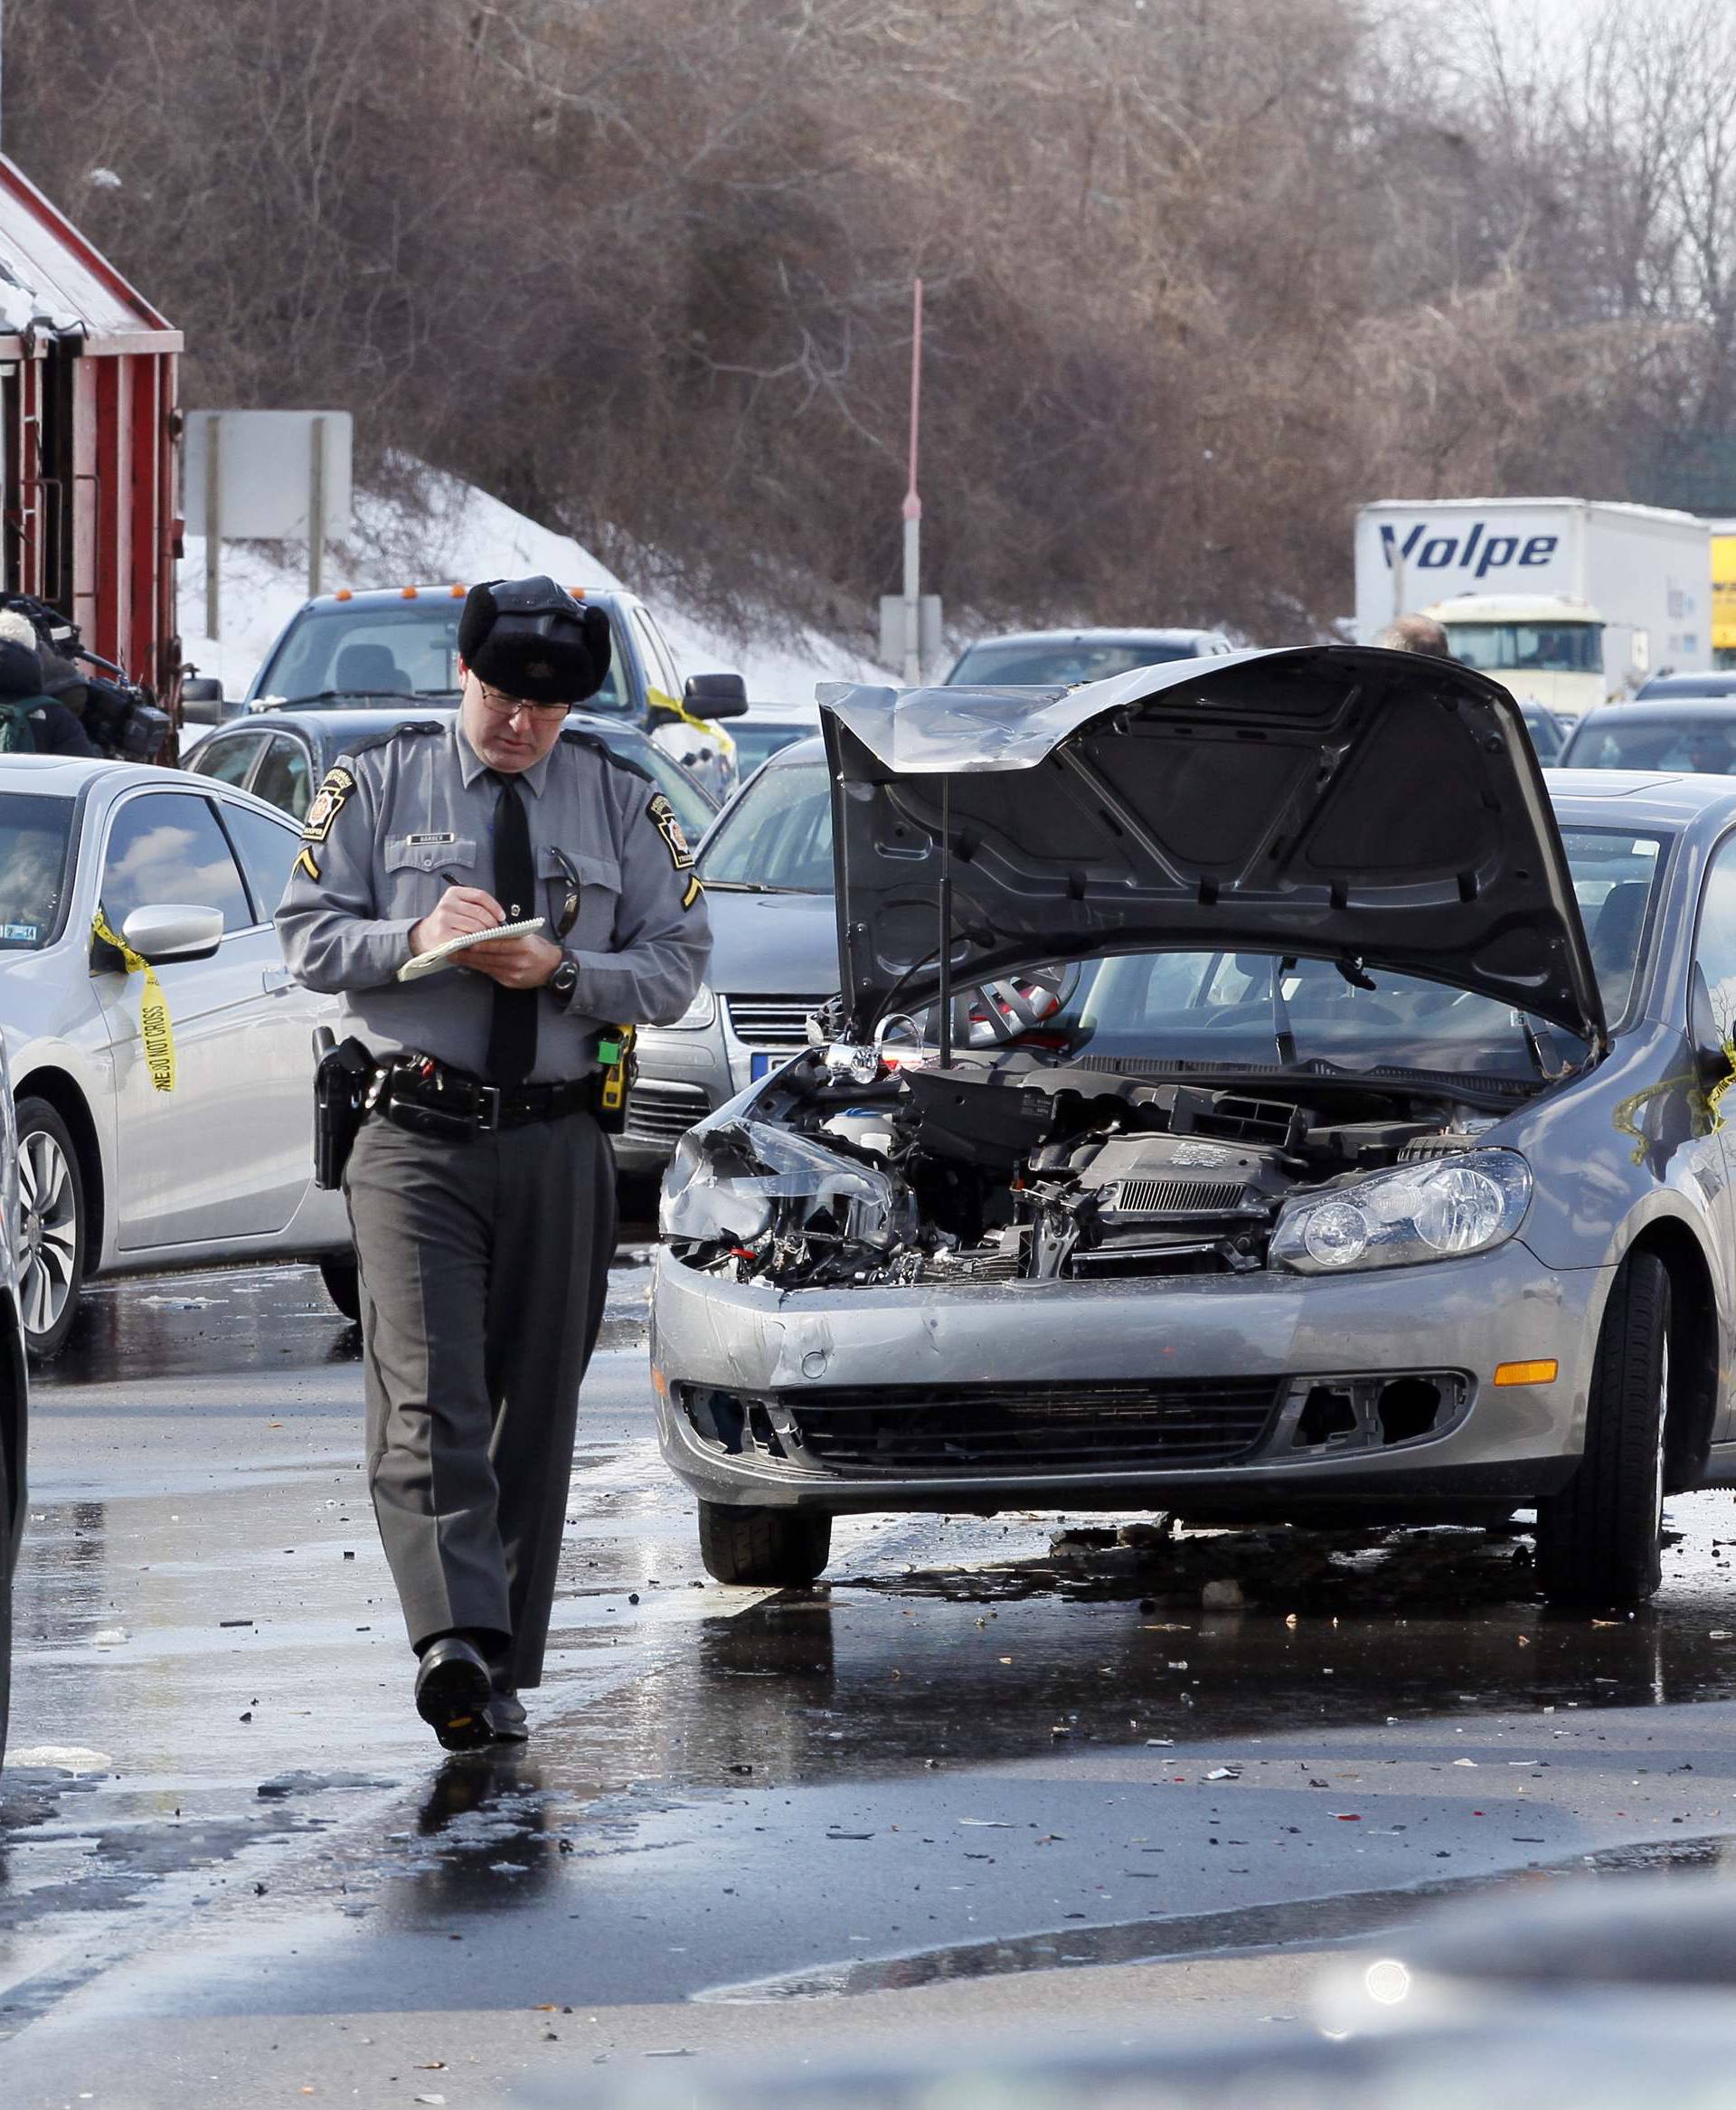 A Pennsylvania State Police Trooper is at the scene of an earlier multi-car and truck pile up during the morning commute on the Pennsylvania Turnpike near the Bensalem interchange